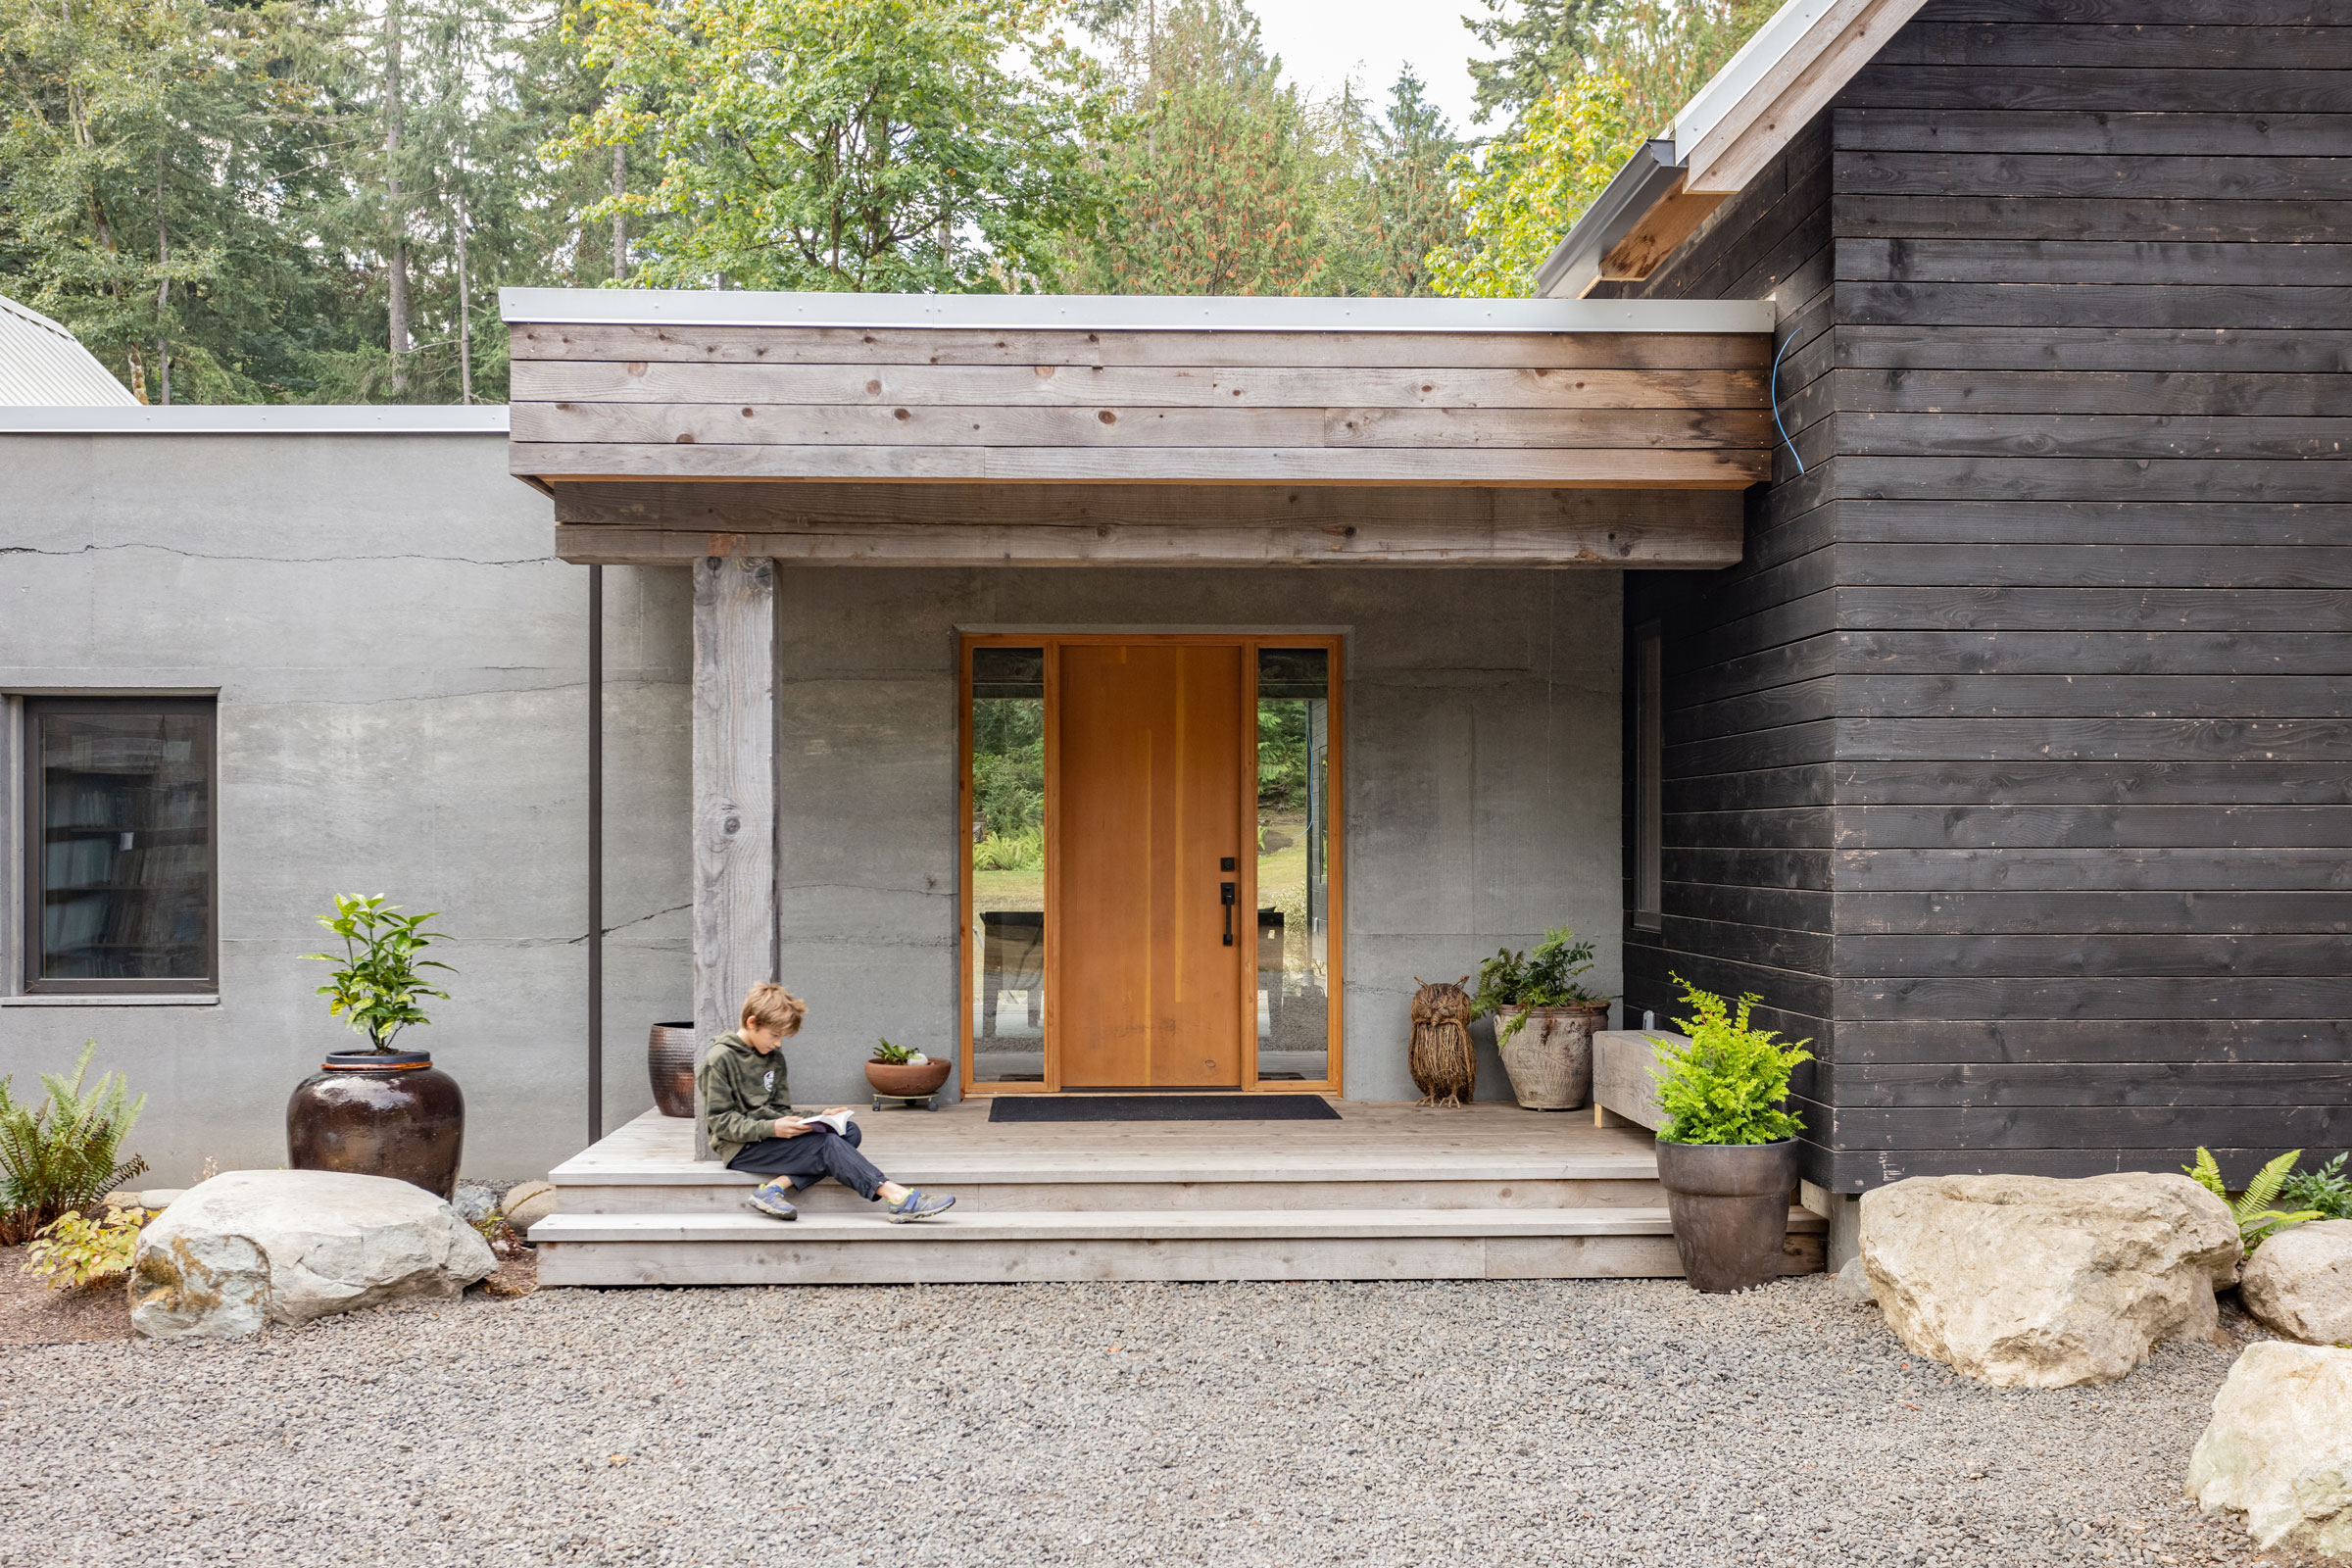 Designing the Silver Rock Living Building Home in the Pacific Northwest Forest